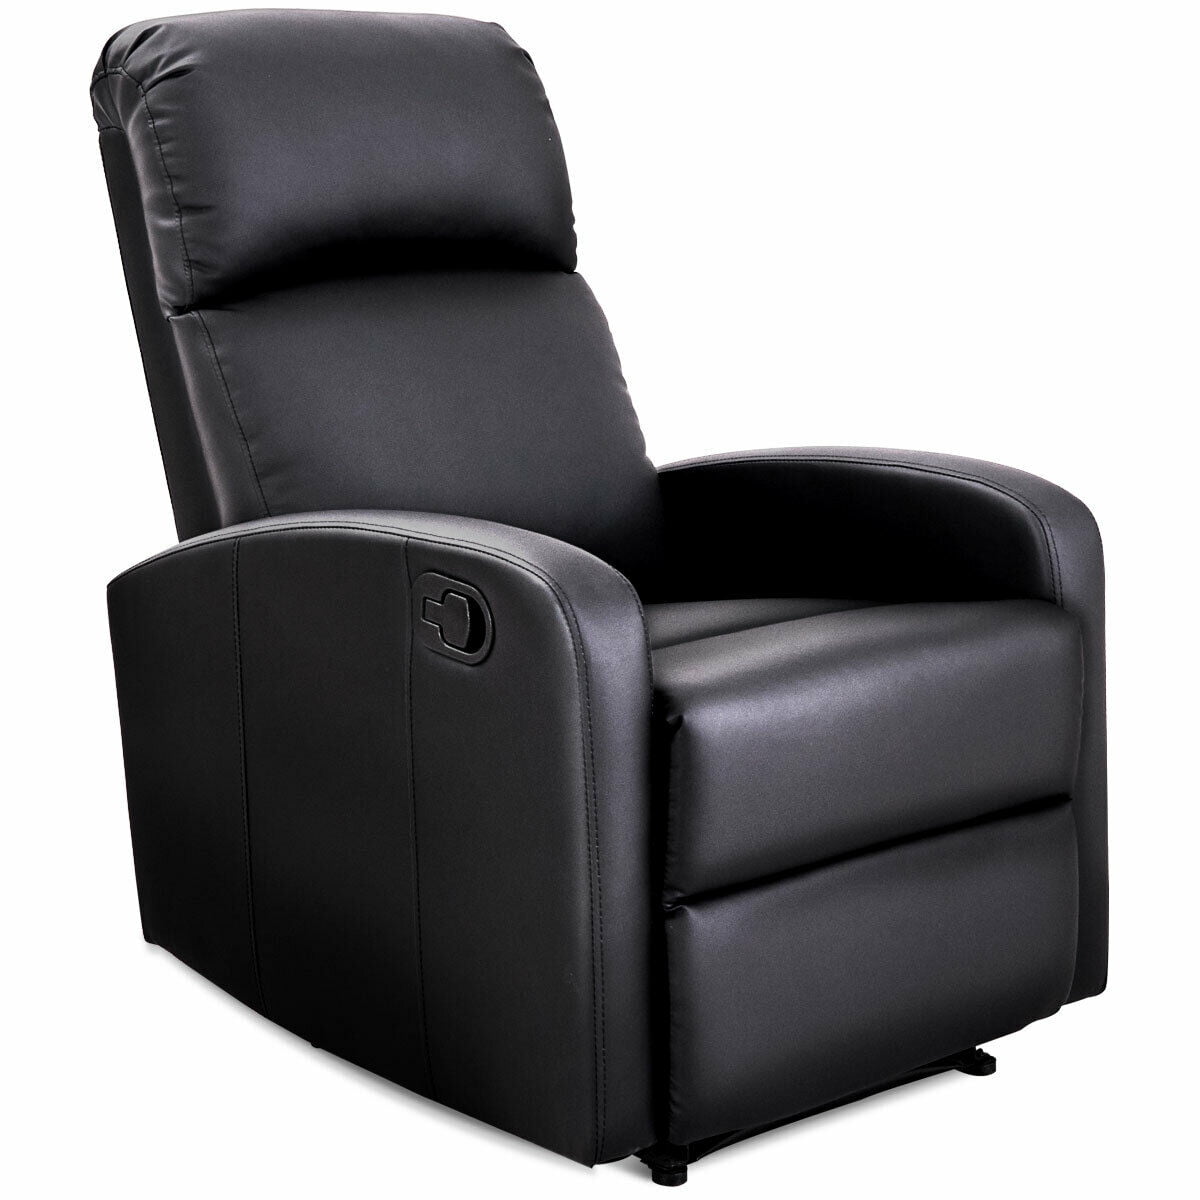 Details about   2 In 1 Sofa Chair Adjustable Single Recliner Armchair with Back Support Storage 